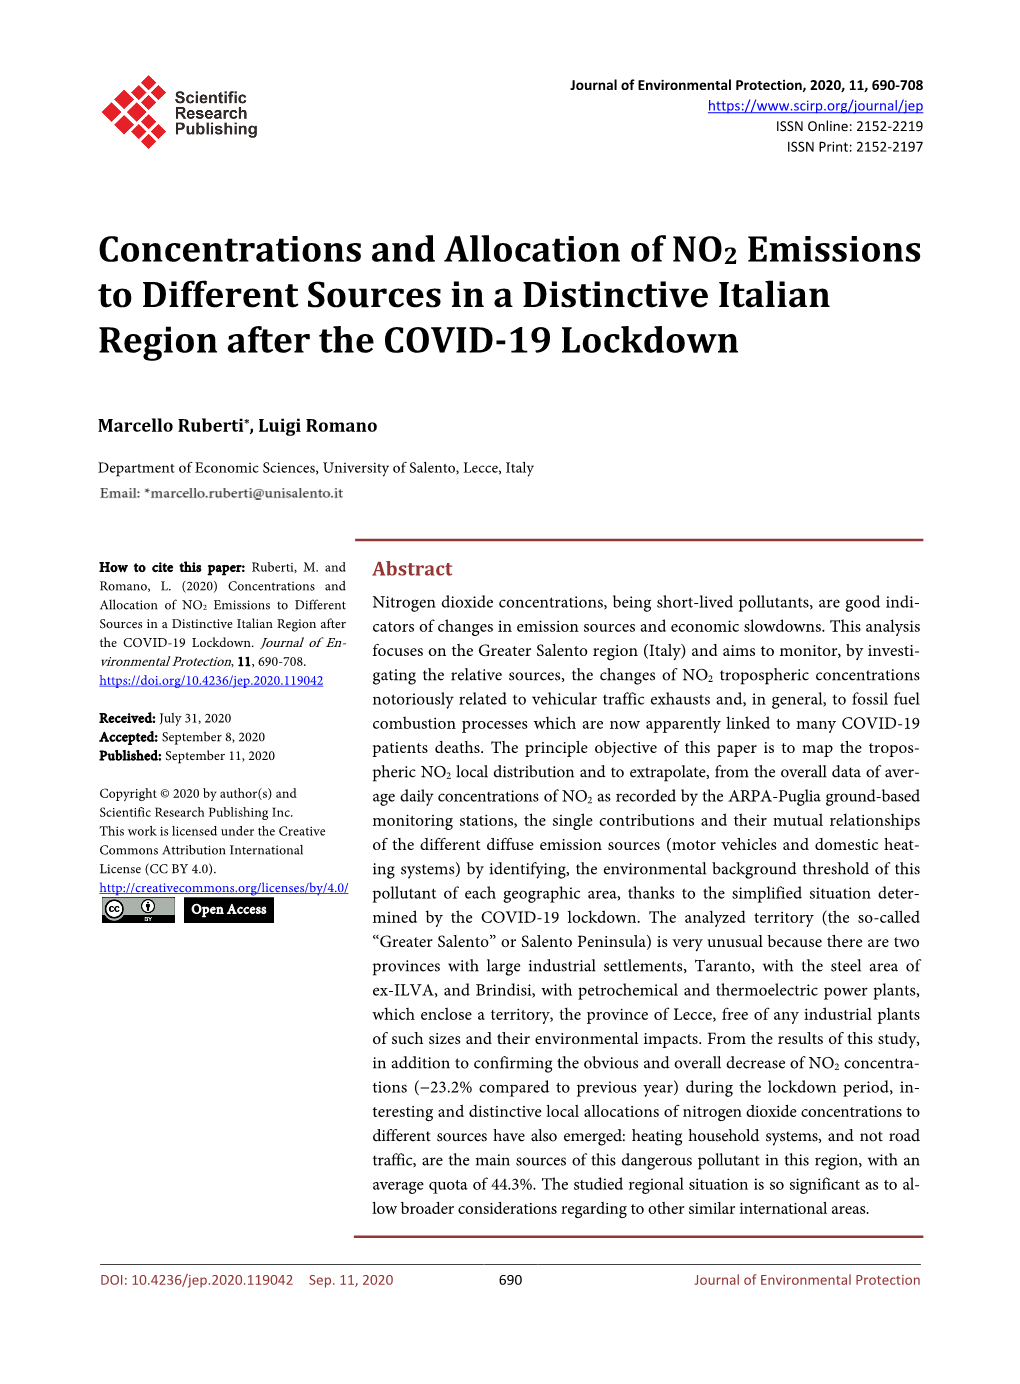 Concentrations and Allocation of NO2 Emissions to Different Sources in a Distinctive Italian Region After the COVID-19 Lockdown